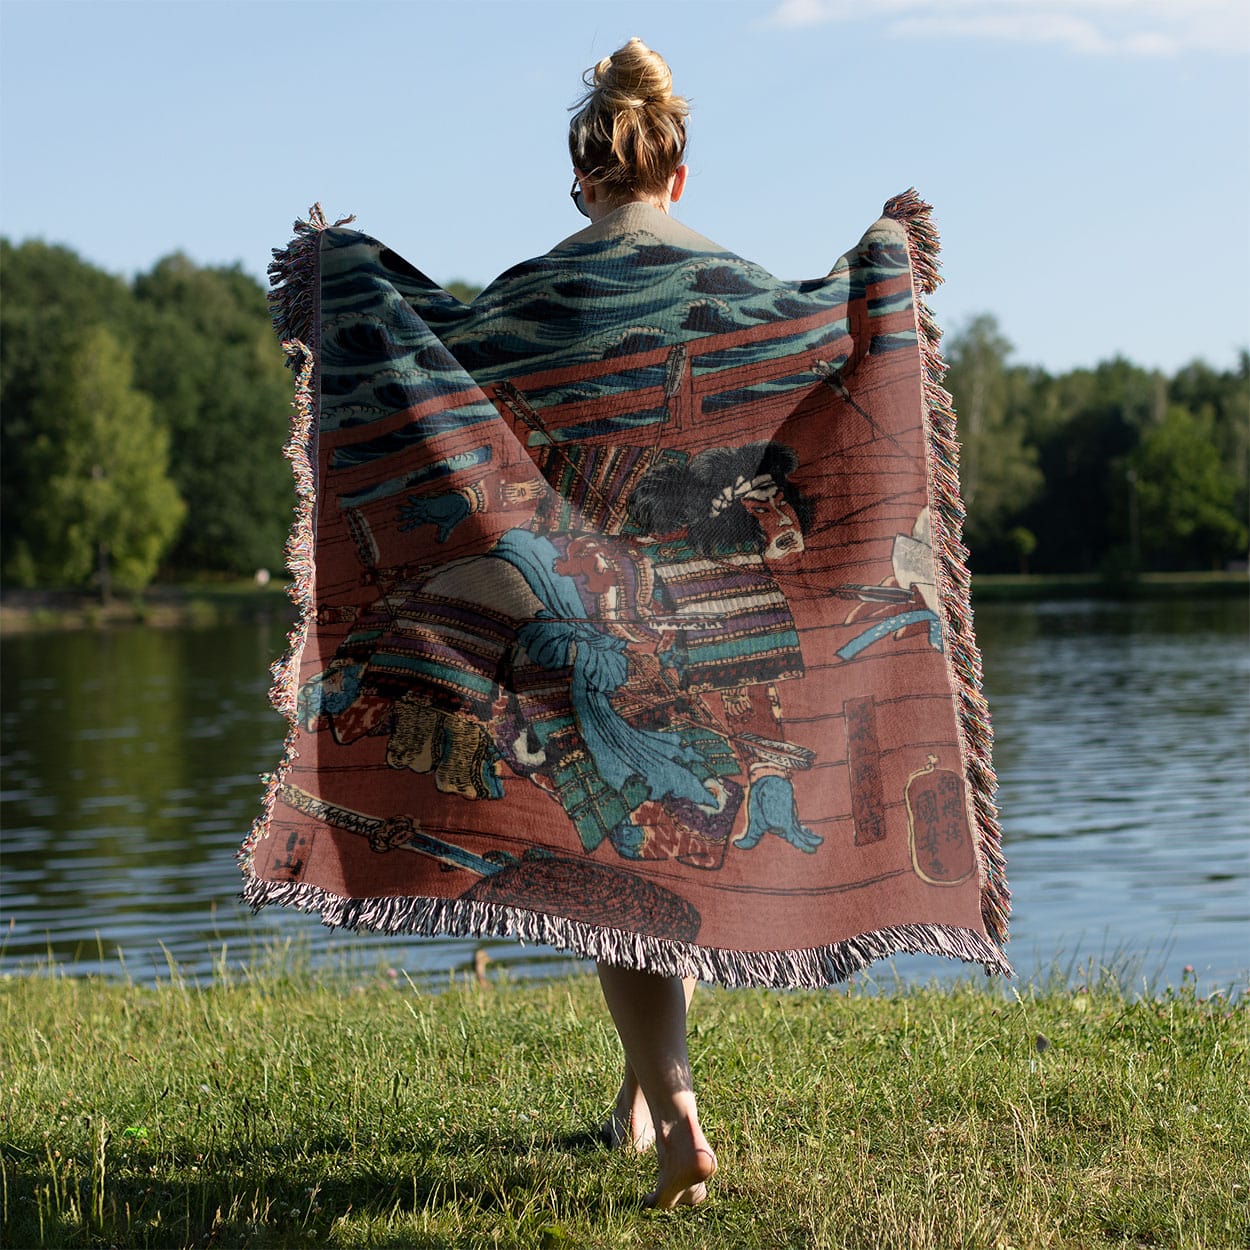 Warrior on a Boat Woven Blanket Held on a Woman's Back Outside